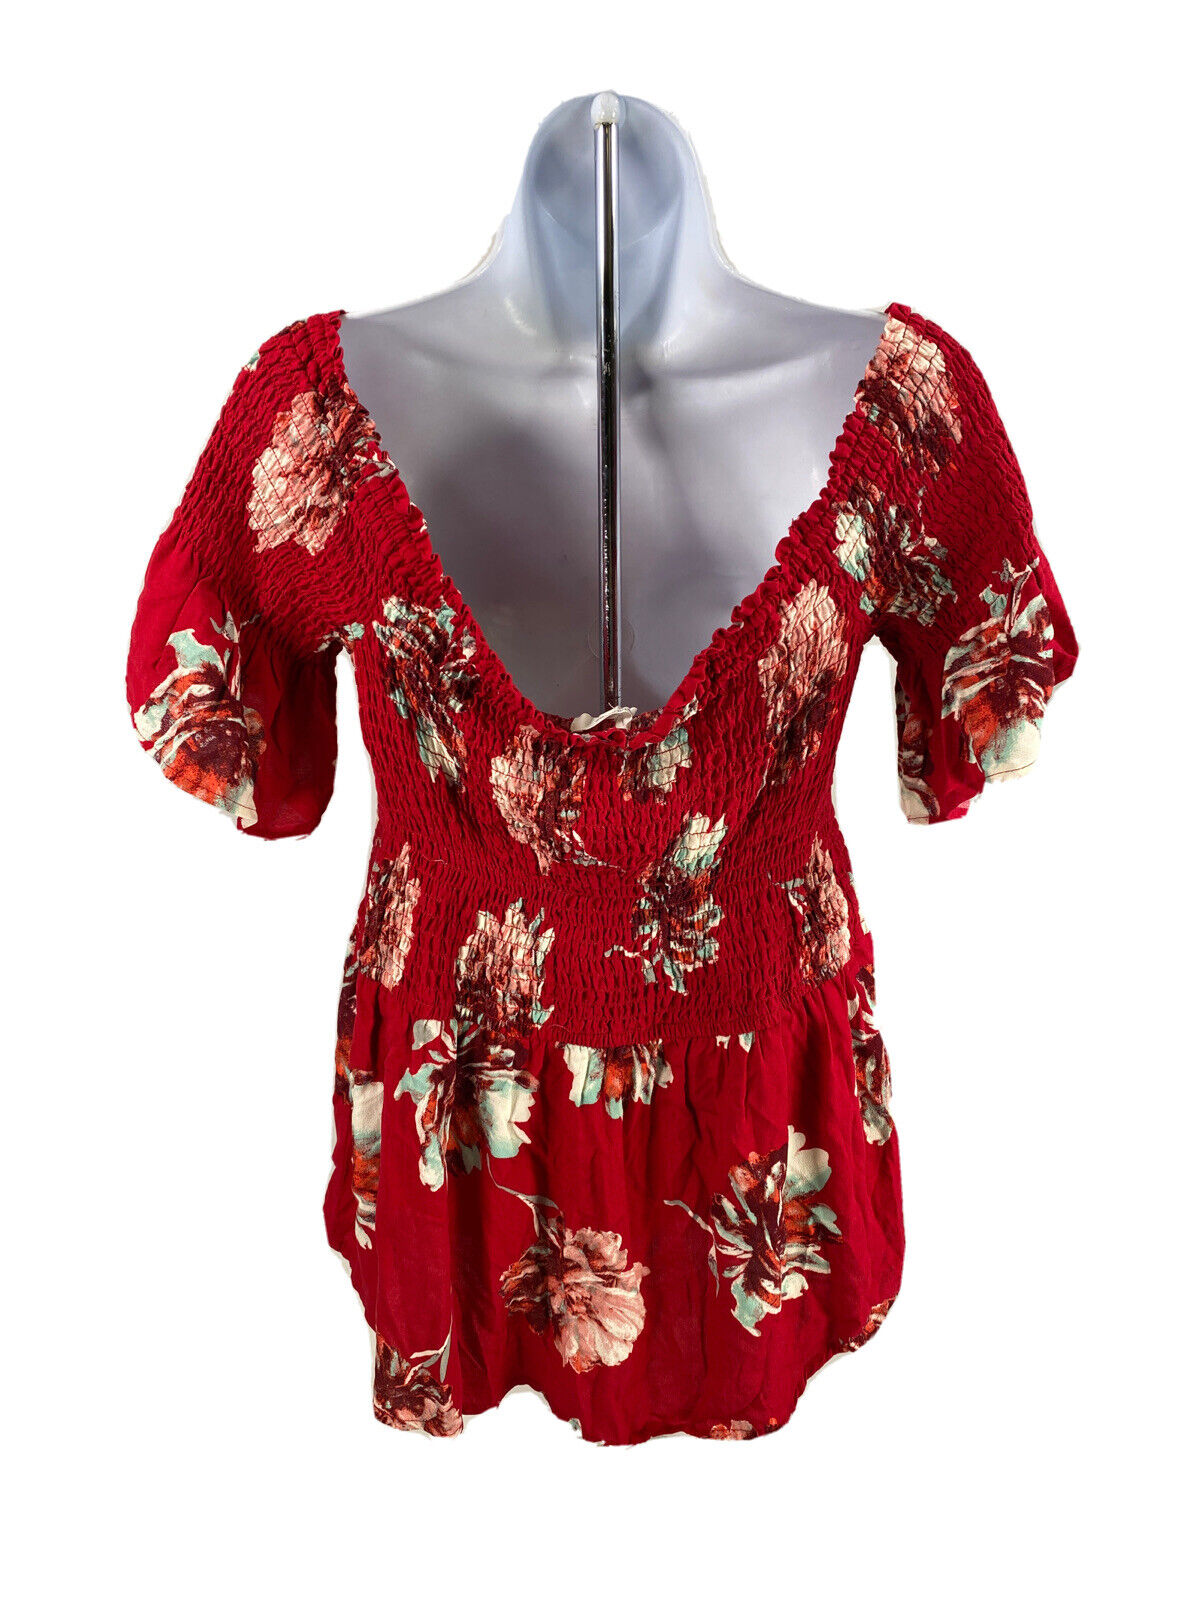 NEW Maurices Women's Red Floral Off The Shoulder Smocked Blouse - L